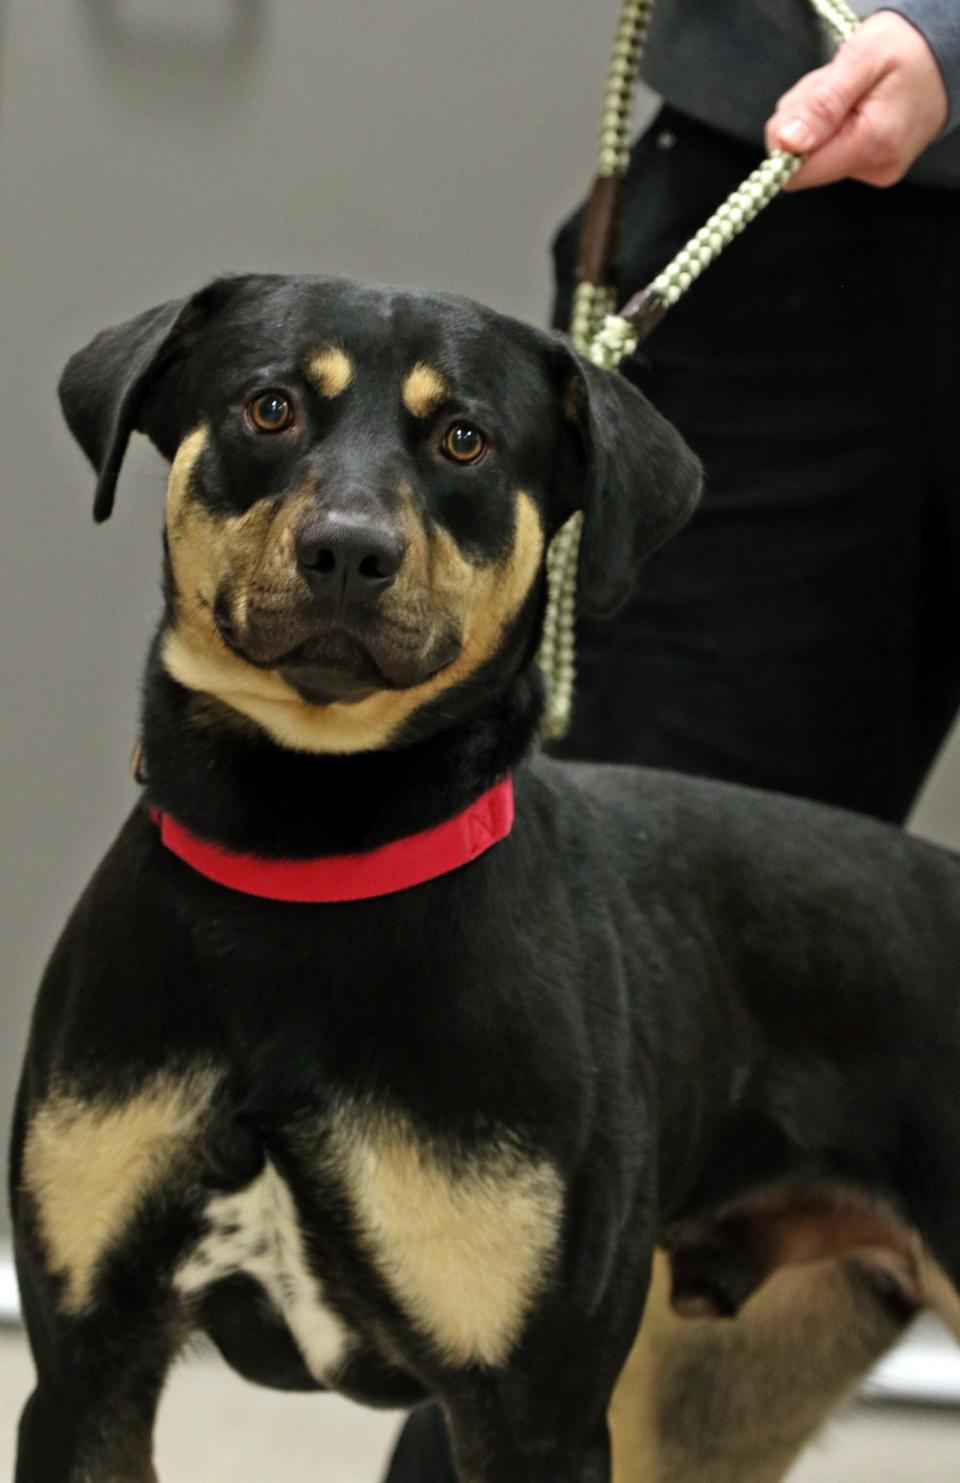 Dirk is available for adoption at Gaston County Animal Care and Enforcement.